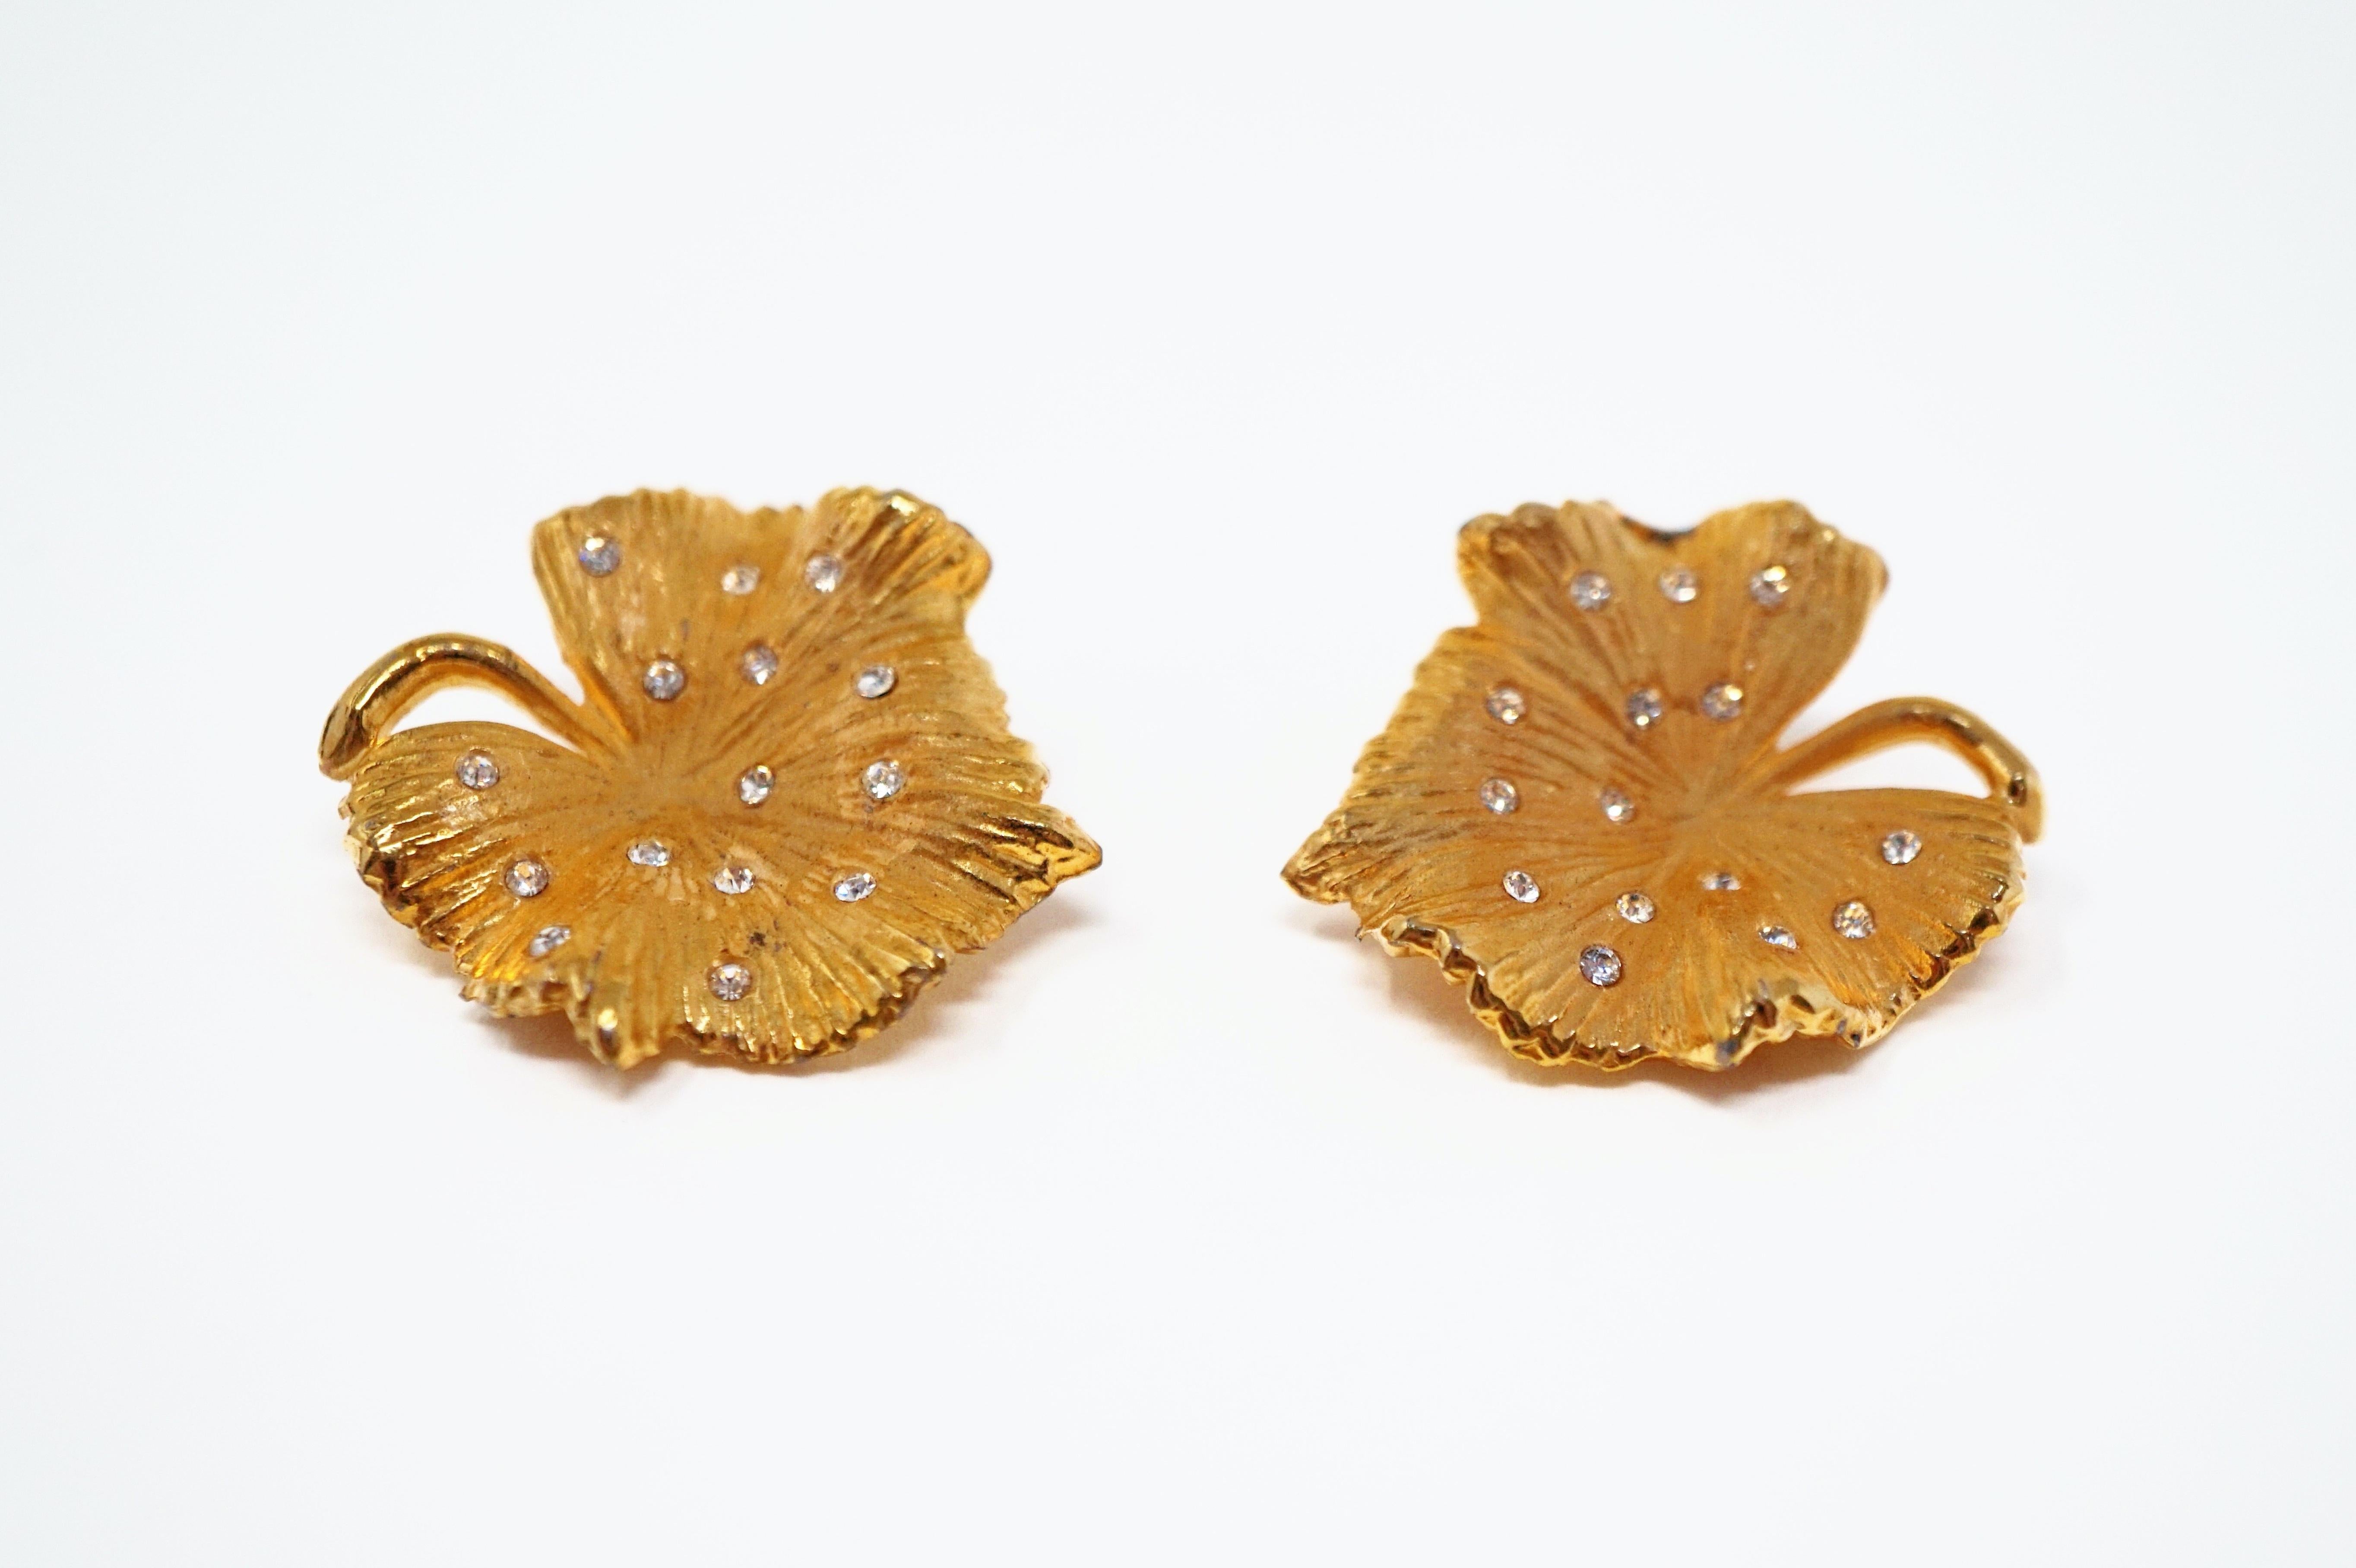 Modern Vintage Gilded Leaf Earrings with Crystal Accents by Claudette, circa 1950s